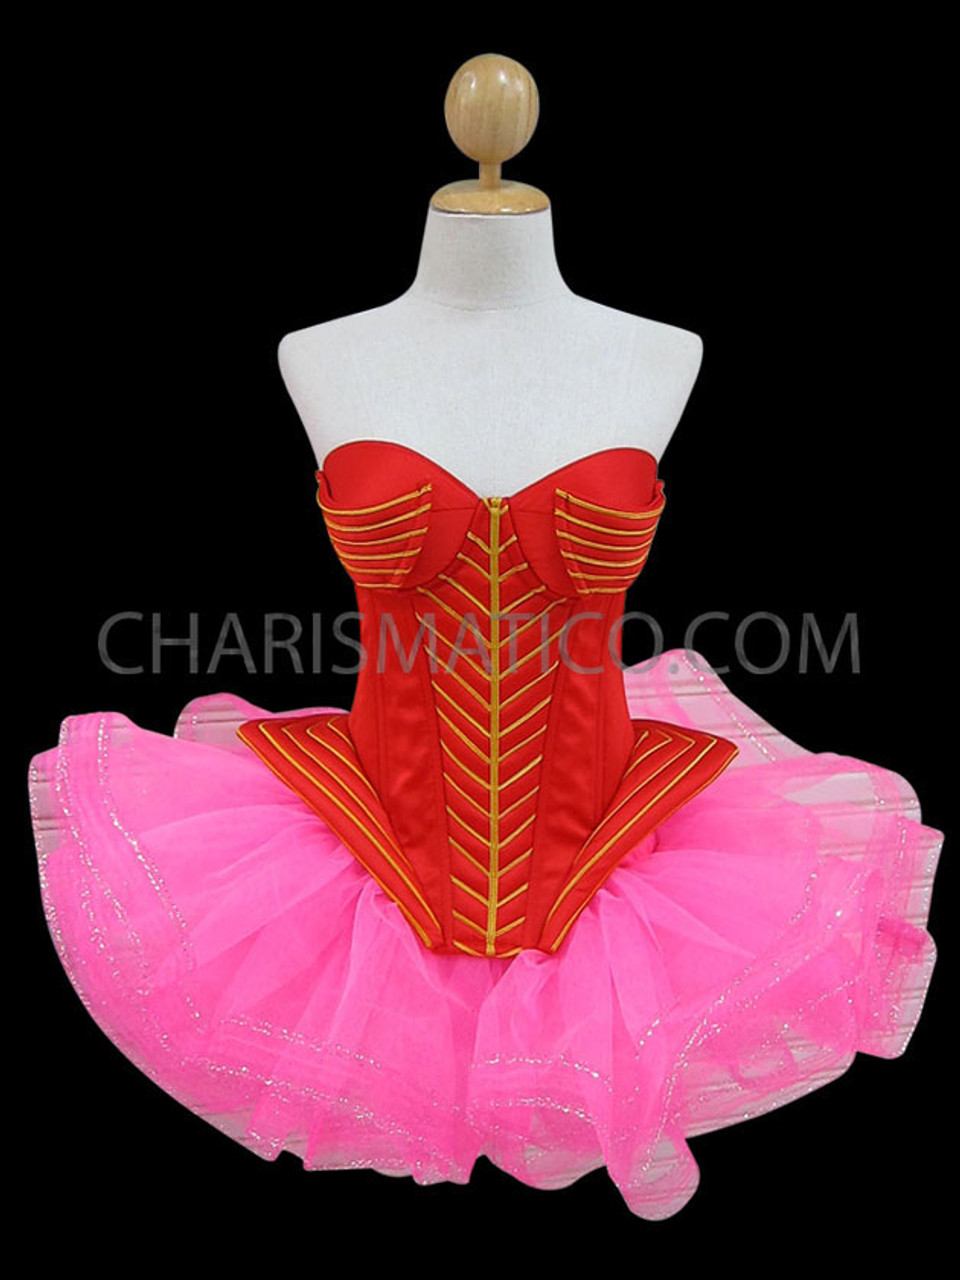 Metallic Gold Edged Quilted Red Showgirl's Corset With Pink Tutu